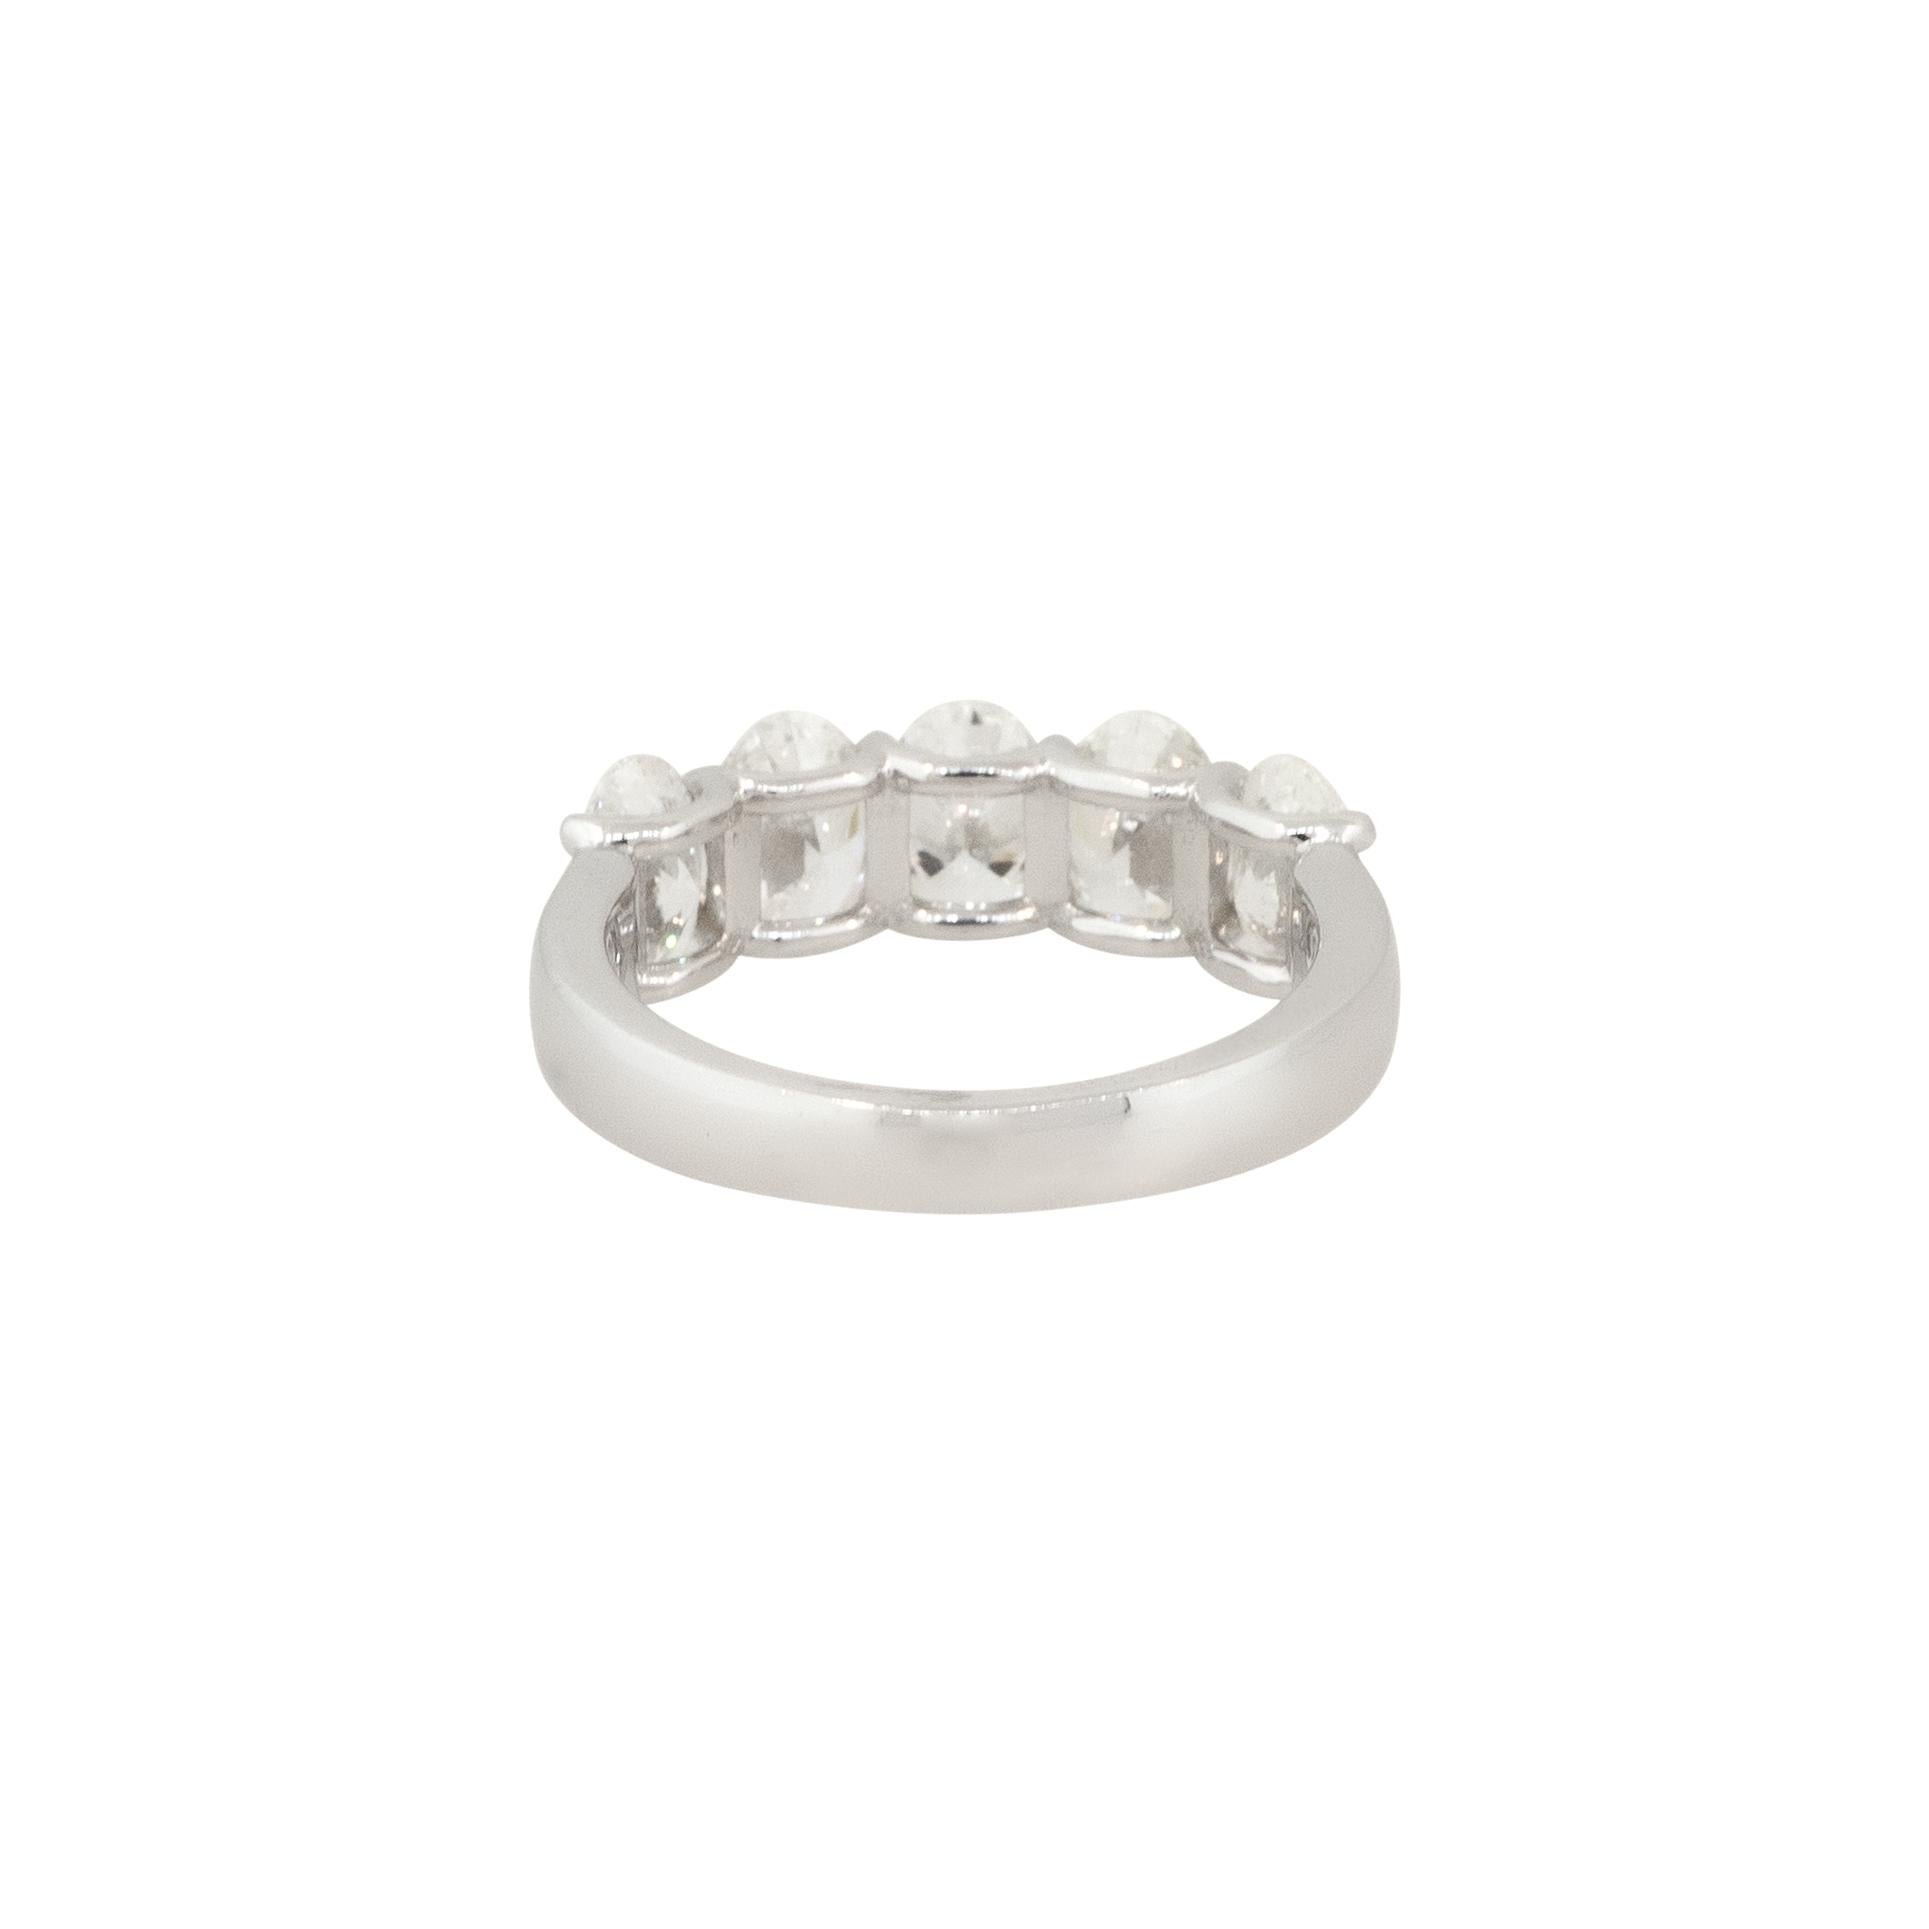 14k White Gold 2.57ctw Oval Shaped 5 Diamond Wedding Band

Style: Women's Oval Diamond Band
Material: 14k White Gold
Diamond Details: Approximately 2.57ctw of Oval Diamonds. Diamonds are prong set and they do not go around the band entirely.